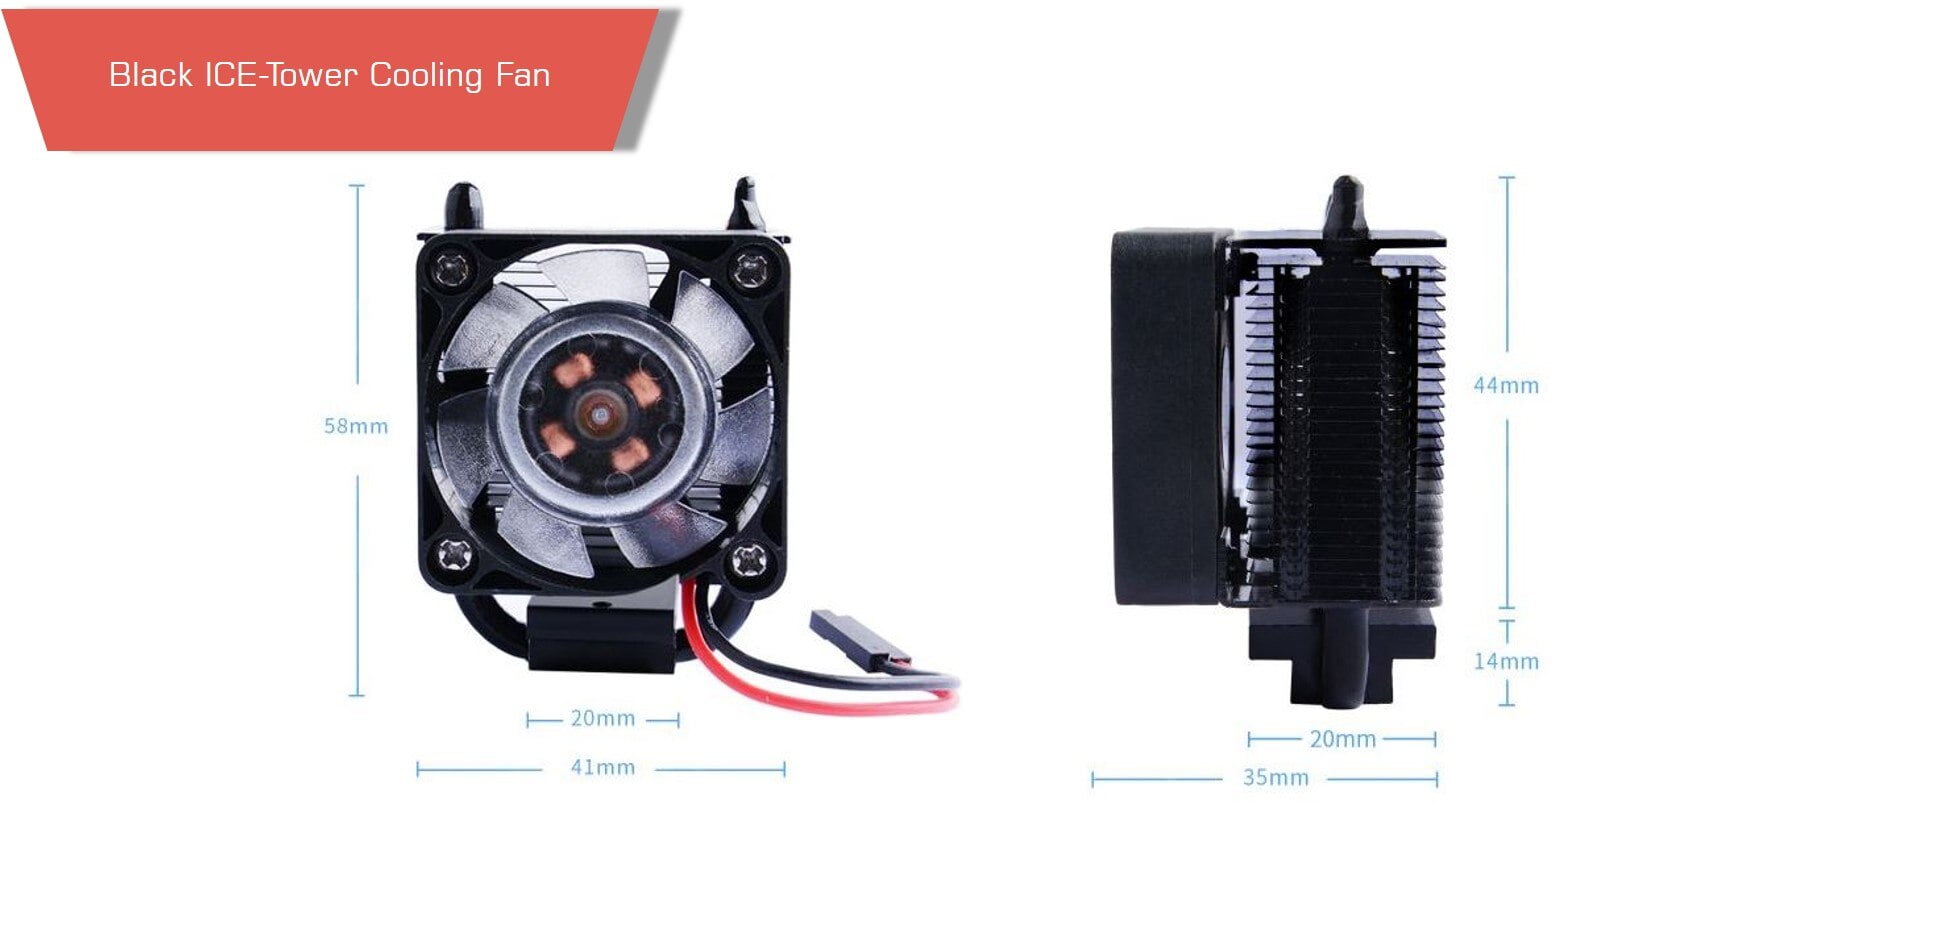 Ice tower cpucoolingfanforraspberrypi p7 - ice tower, cpu cooling fan, raspberry pi 4b, thermal pad, color led, heatsink, active cooling - motionew - 2